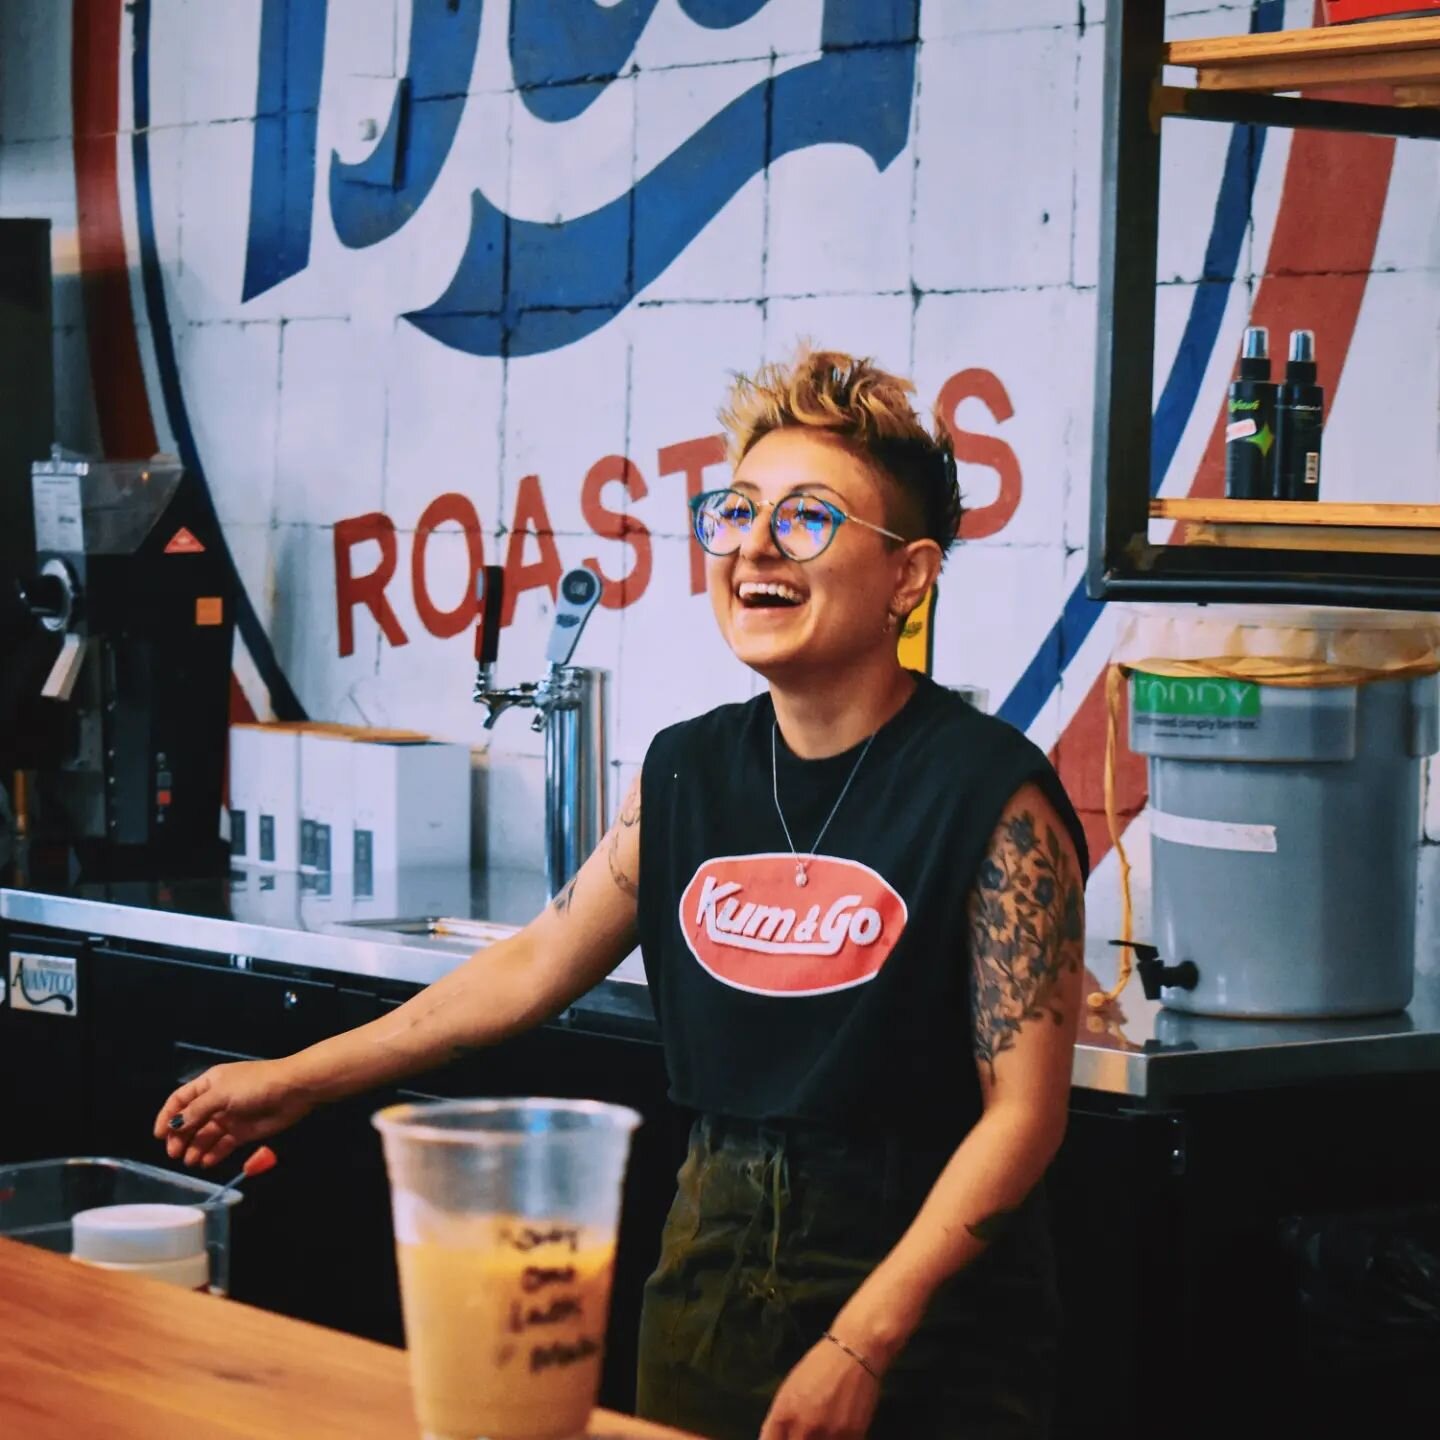 Summer Shout-out to our amazing Cafe Manager @lil__oats ! Thank you so much for all of your hard work and energy you put into our team and caf&eacute; recipes! 

#kccoffee #bliproasters #westbottoms #blip #kansascity #madeinkc #barista #baristalife #